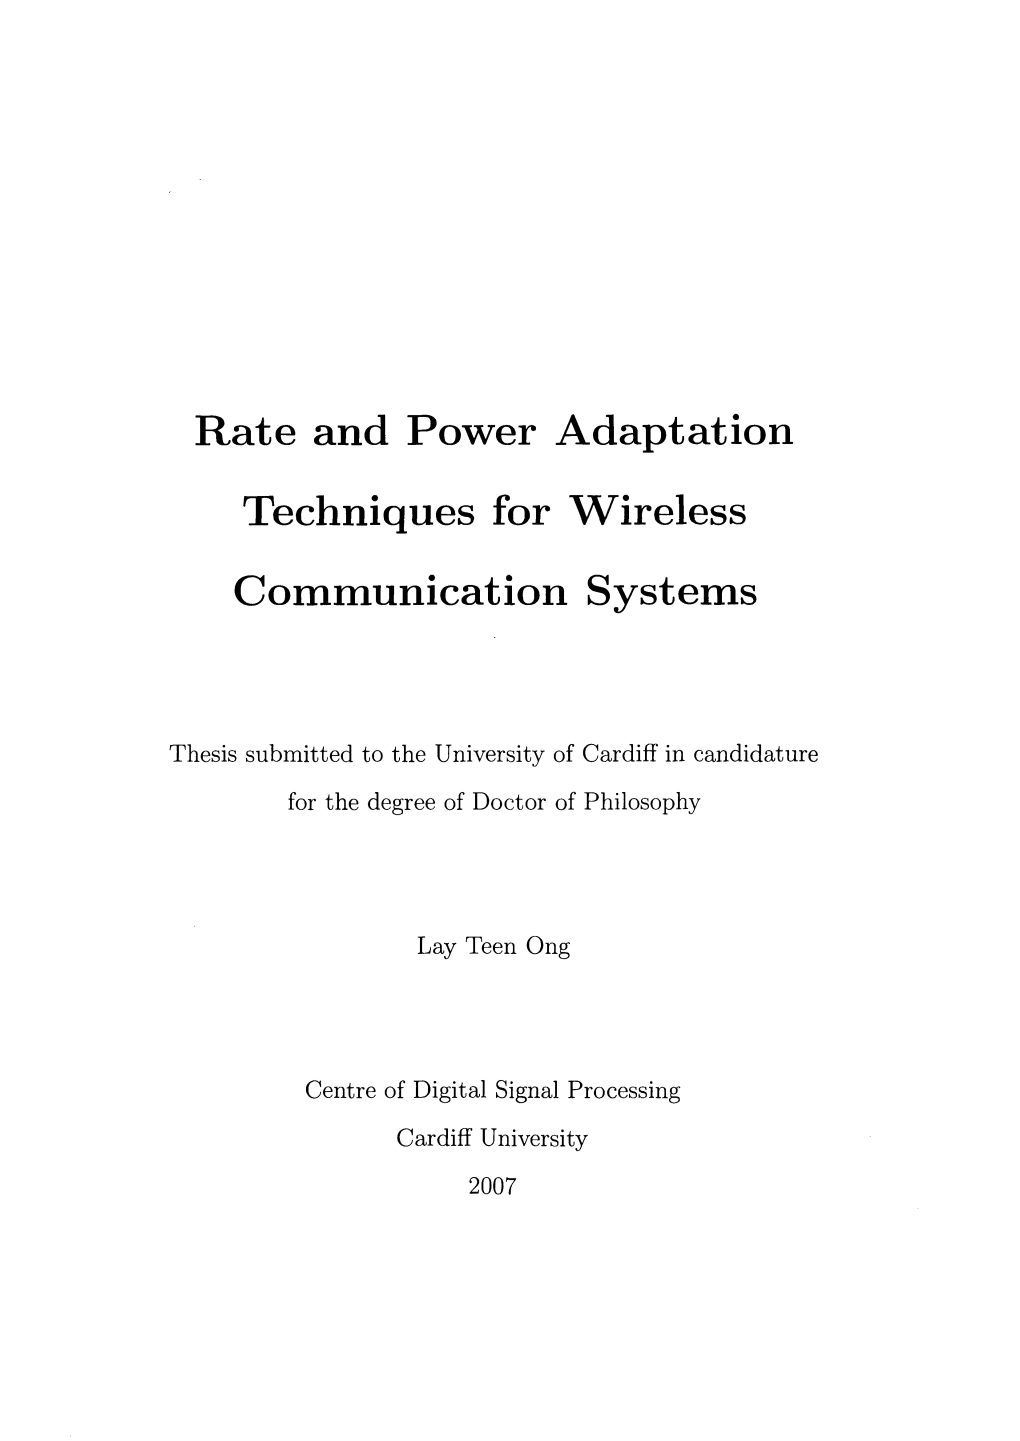 Rate and Power Adaptation Techniques for Wireless Communication Systems